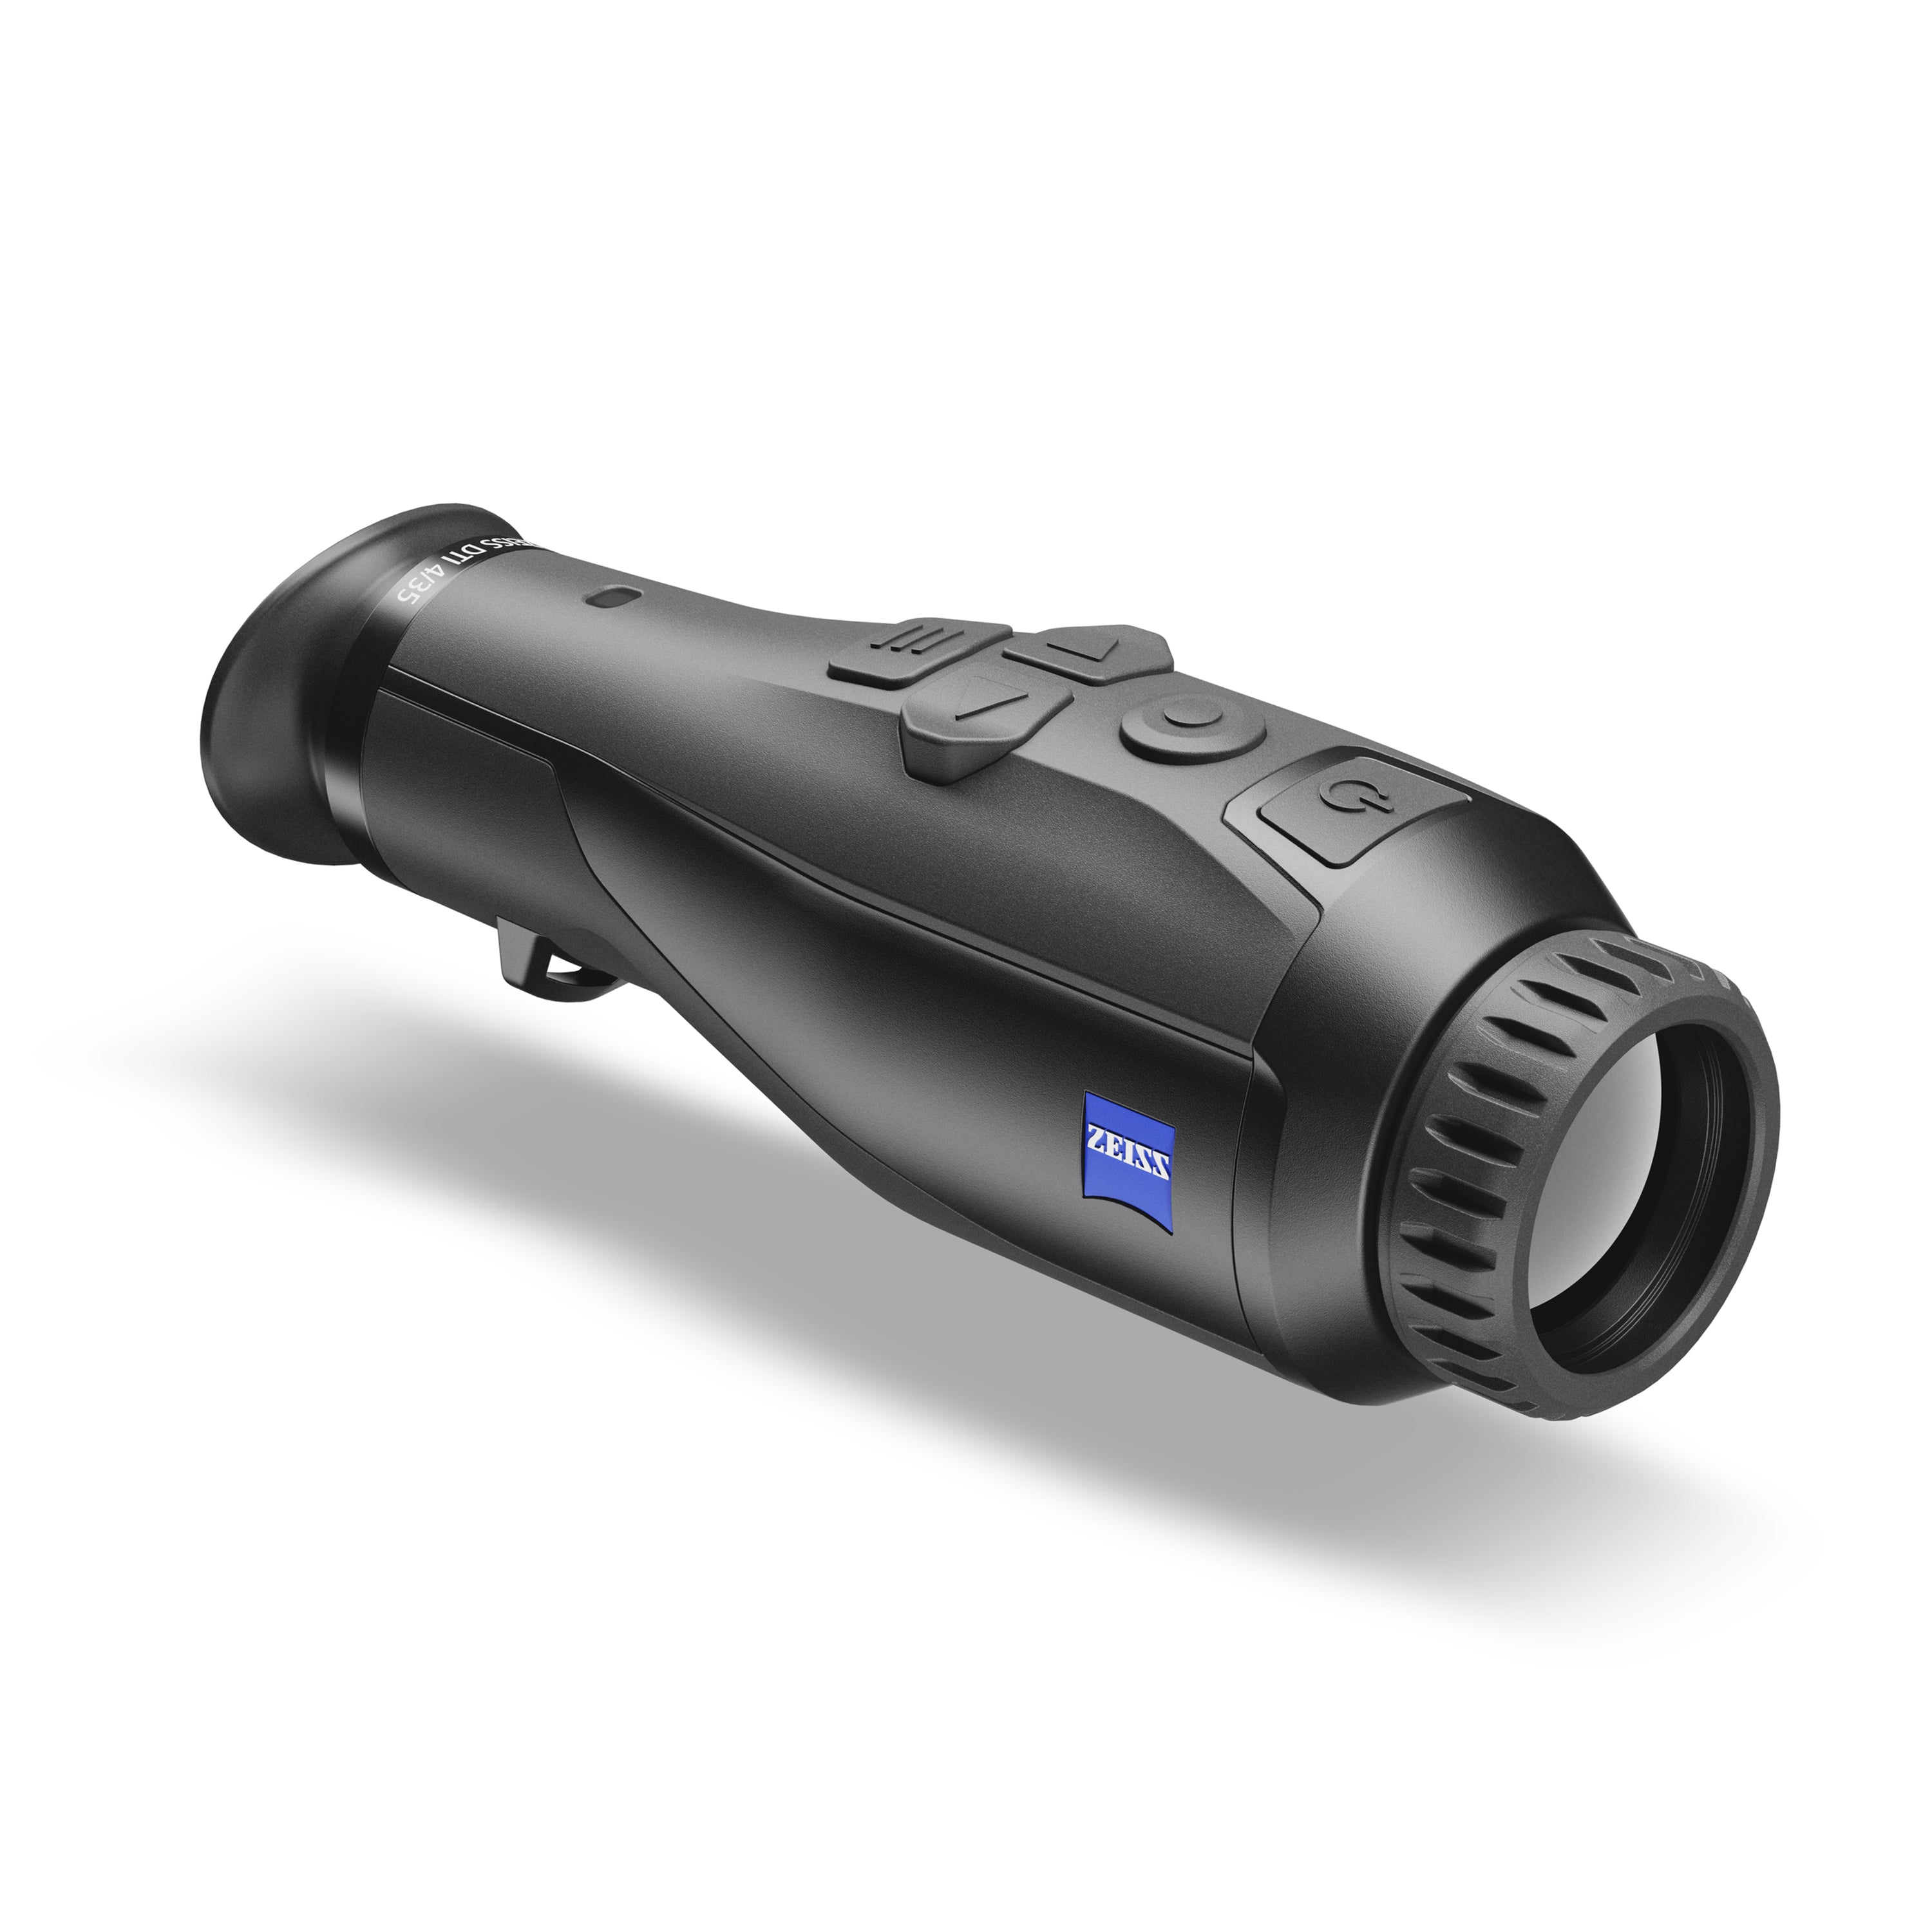 ZEISS DTI 4 Thermal Imaging Camera High-Resolution Monocular for Hunting and Wildlife Observation